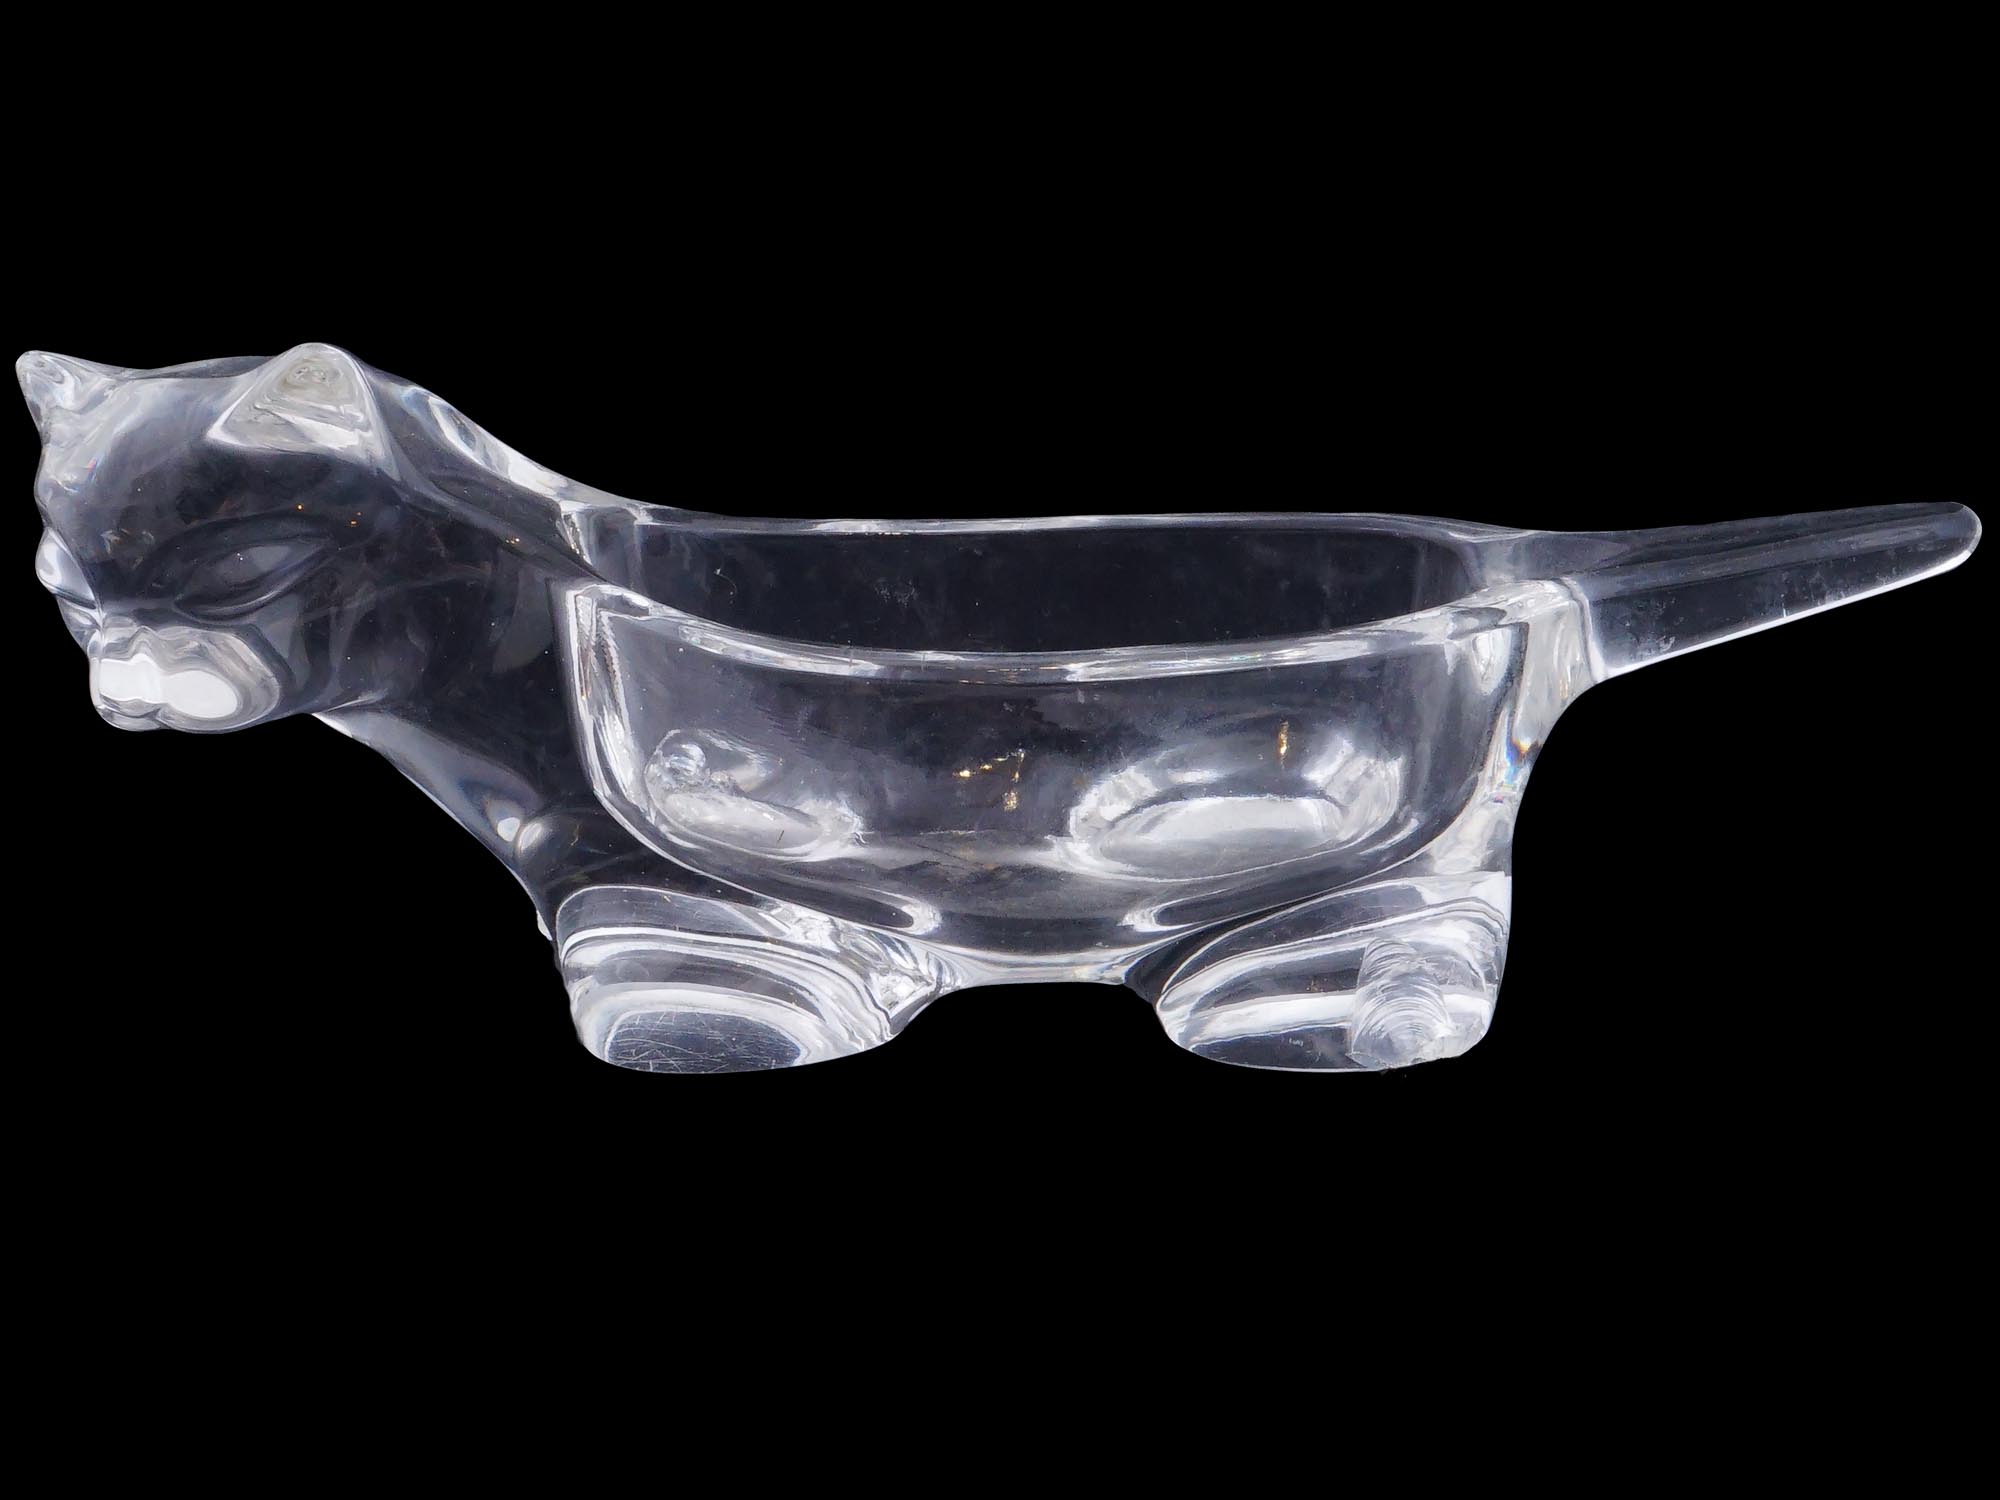 GROUP OF ANIMAL CUT GLASS SCULPTURAL CANDY DISH PIC-10